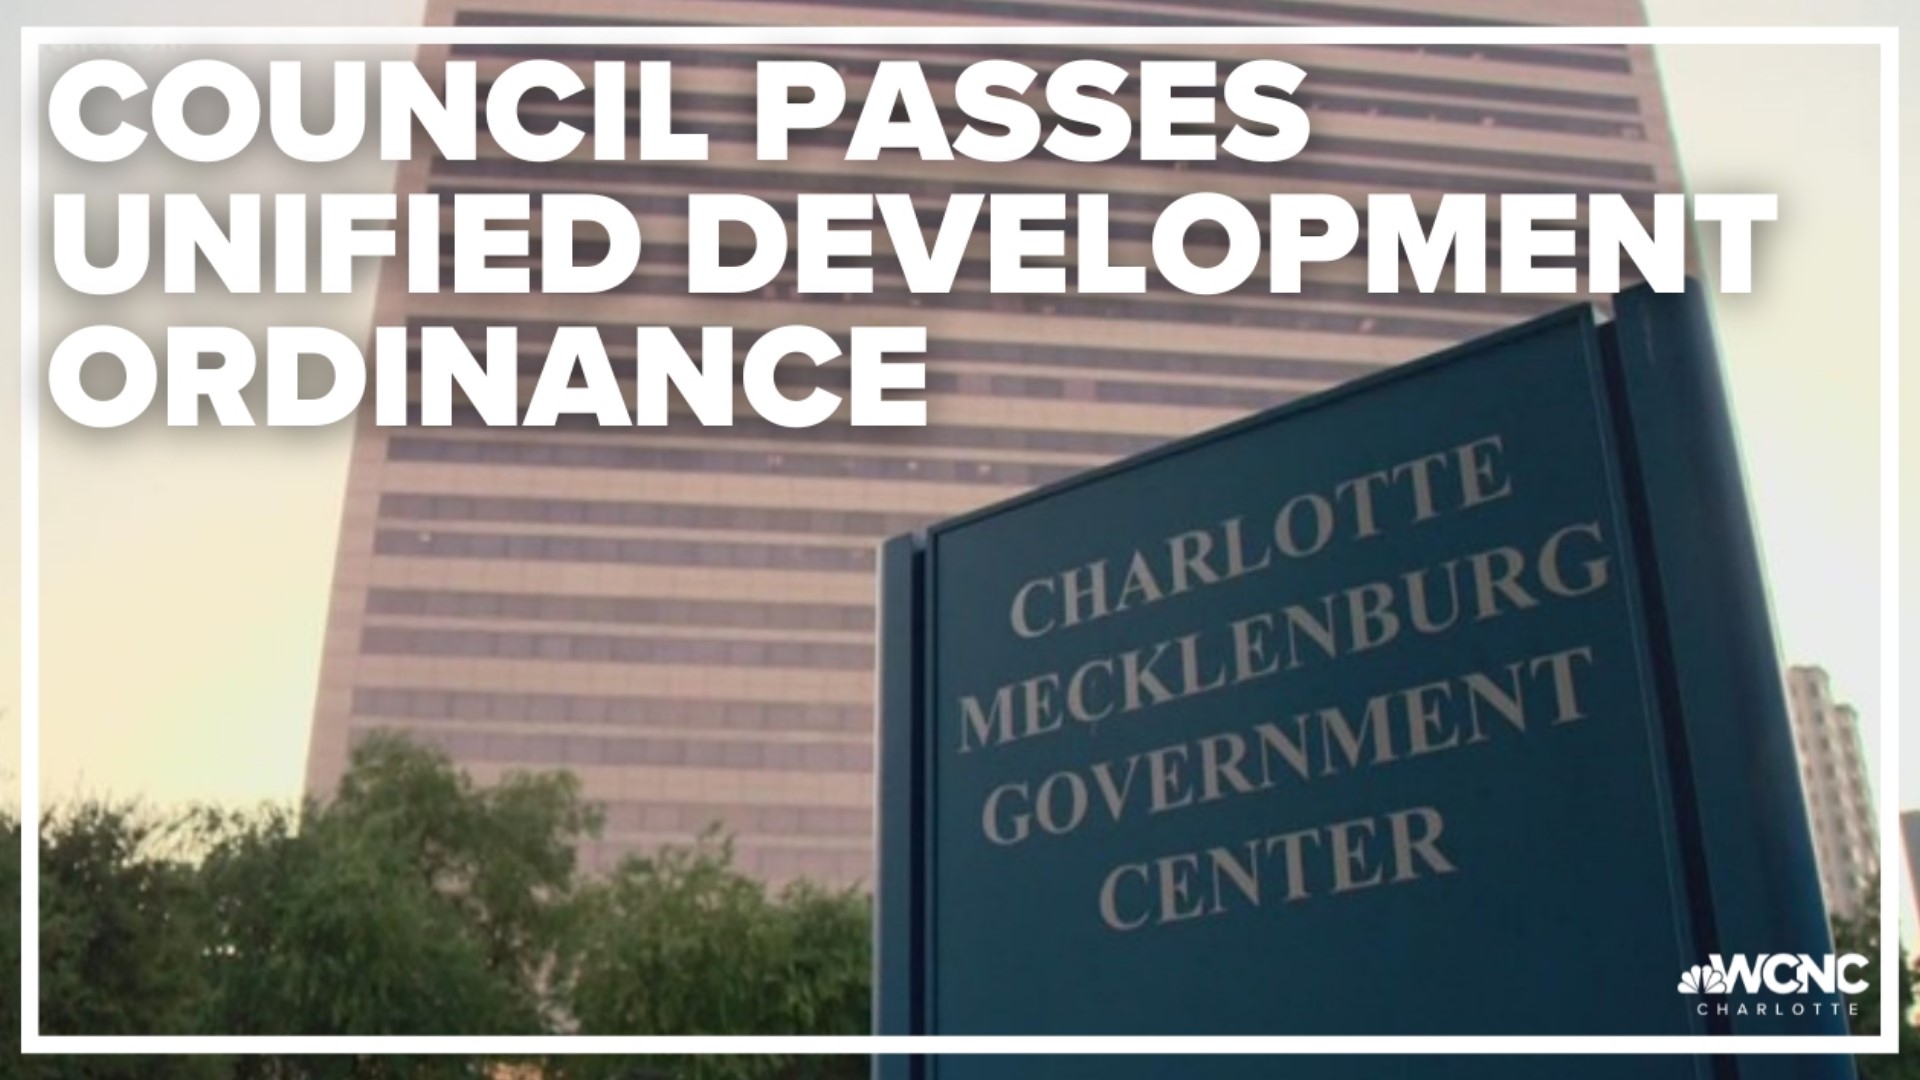 A regulations ordinance with much debate in the community was approved on Monday during Charlotte's city council meeting.